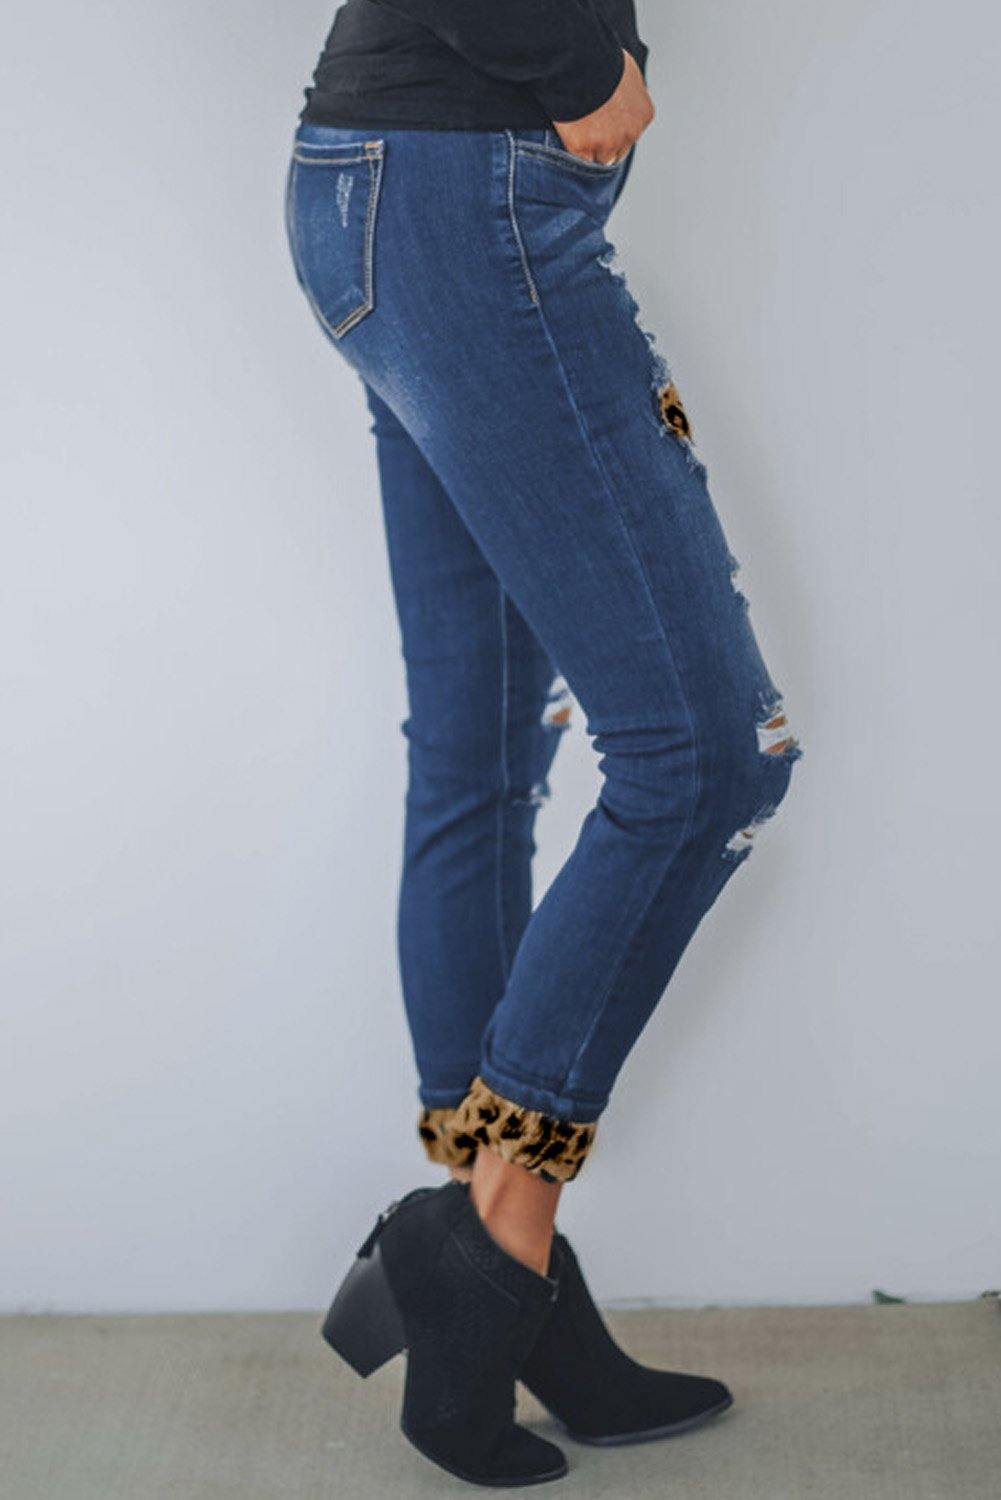 Mid Rise Leopard Patch Distressed Ankle Skinny Jeans - L & M Kee, LLC